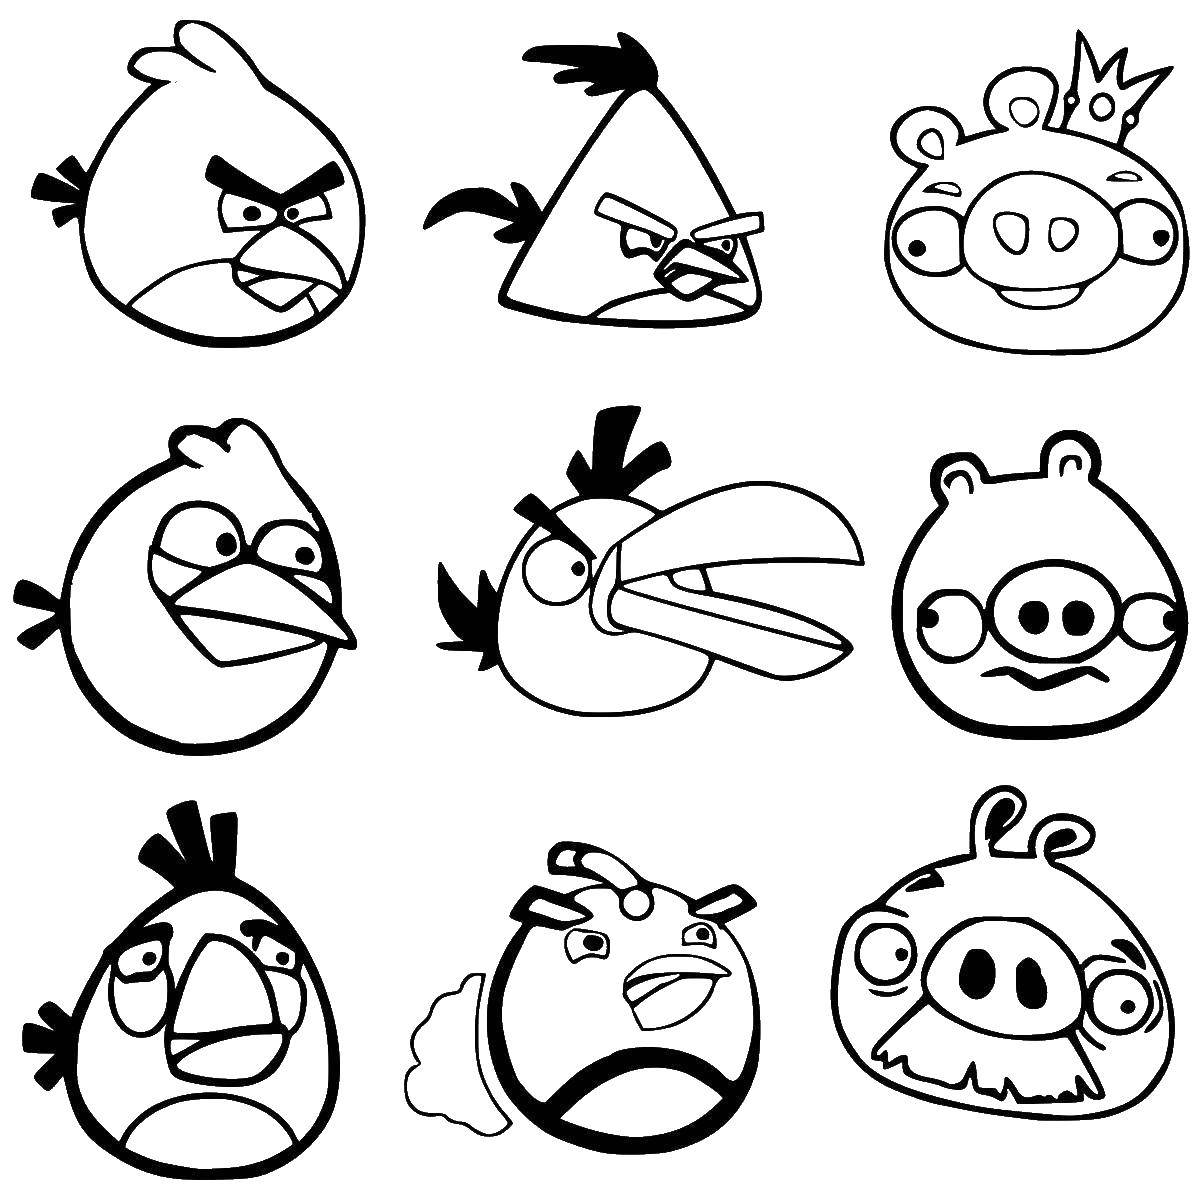 Coloring Angry birds game. Category angry birds. Tags:  Games, Angry Birds .